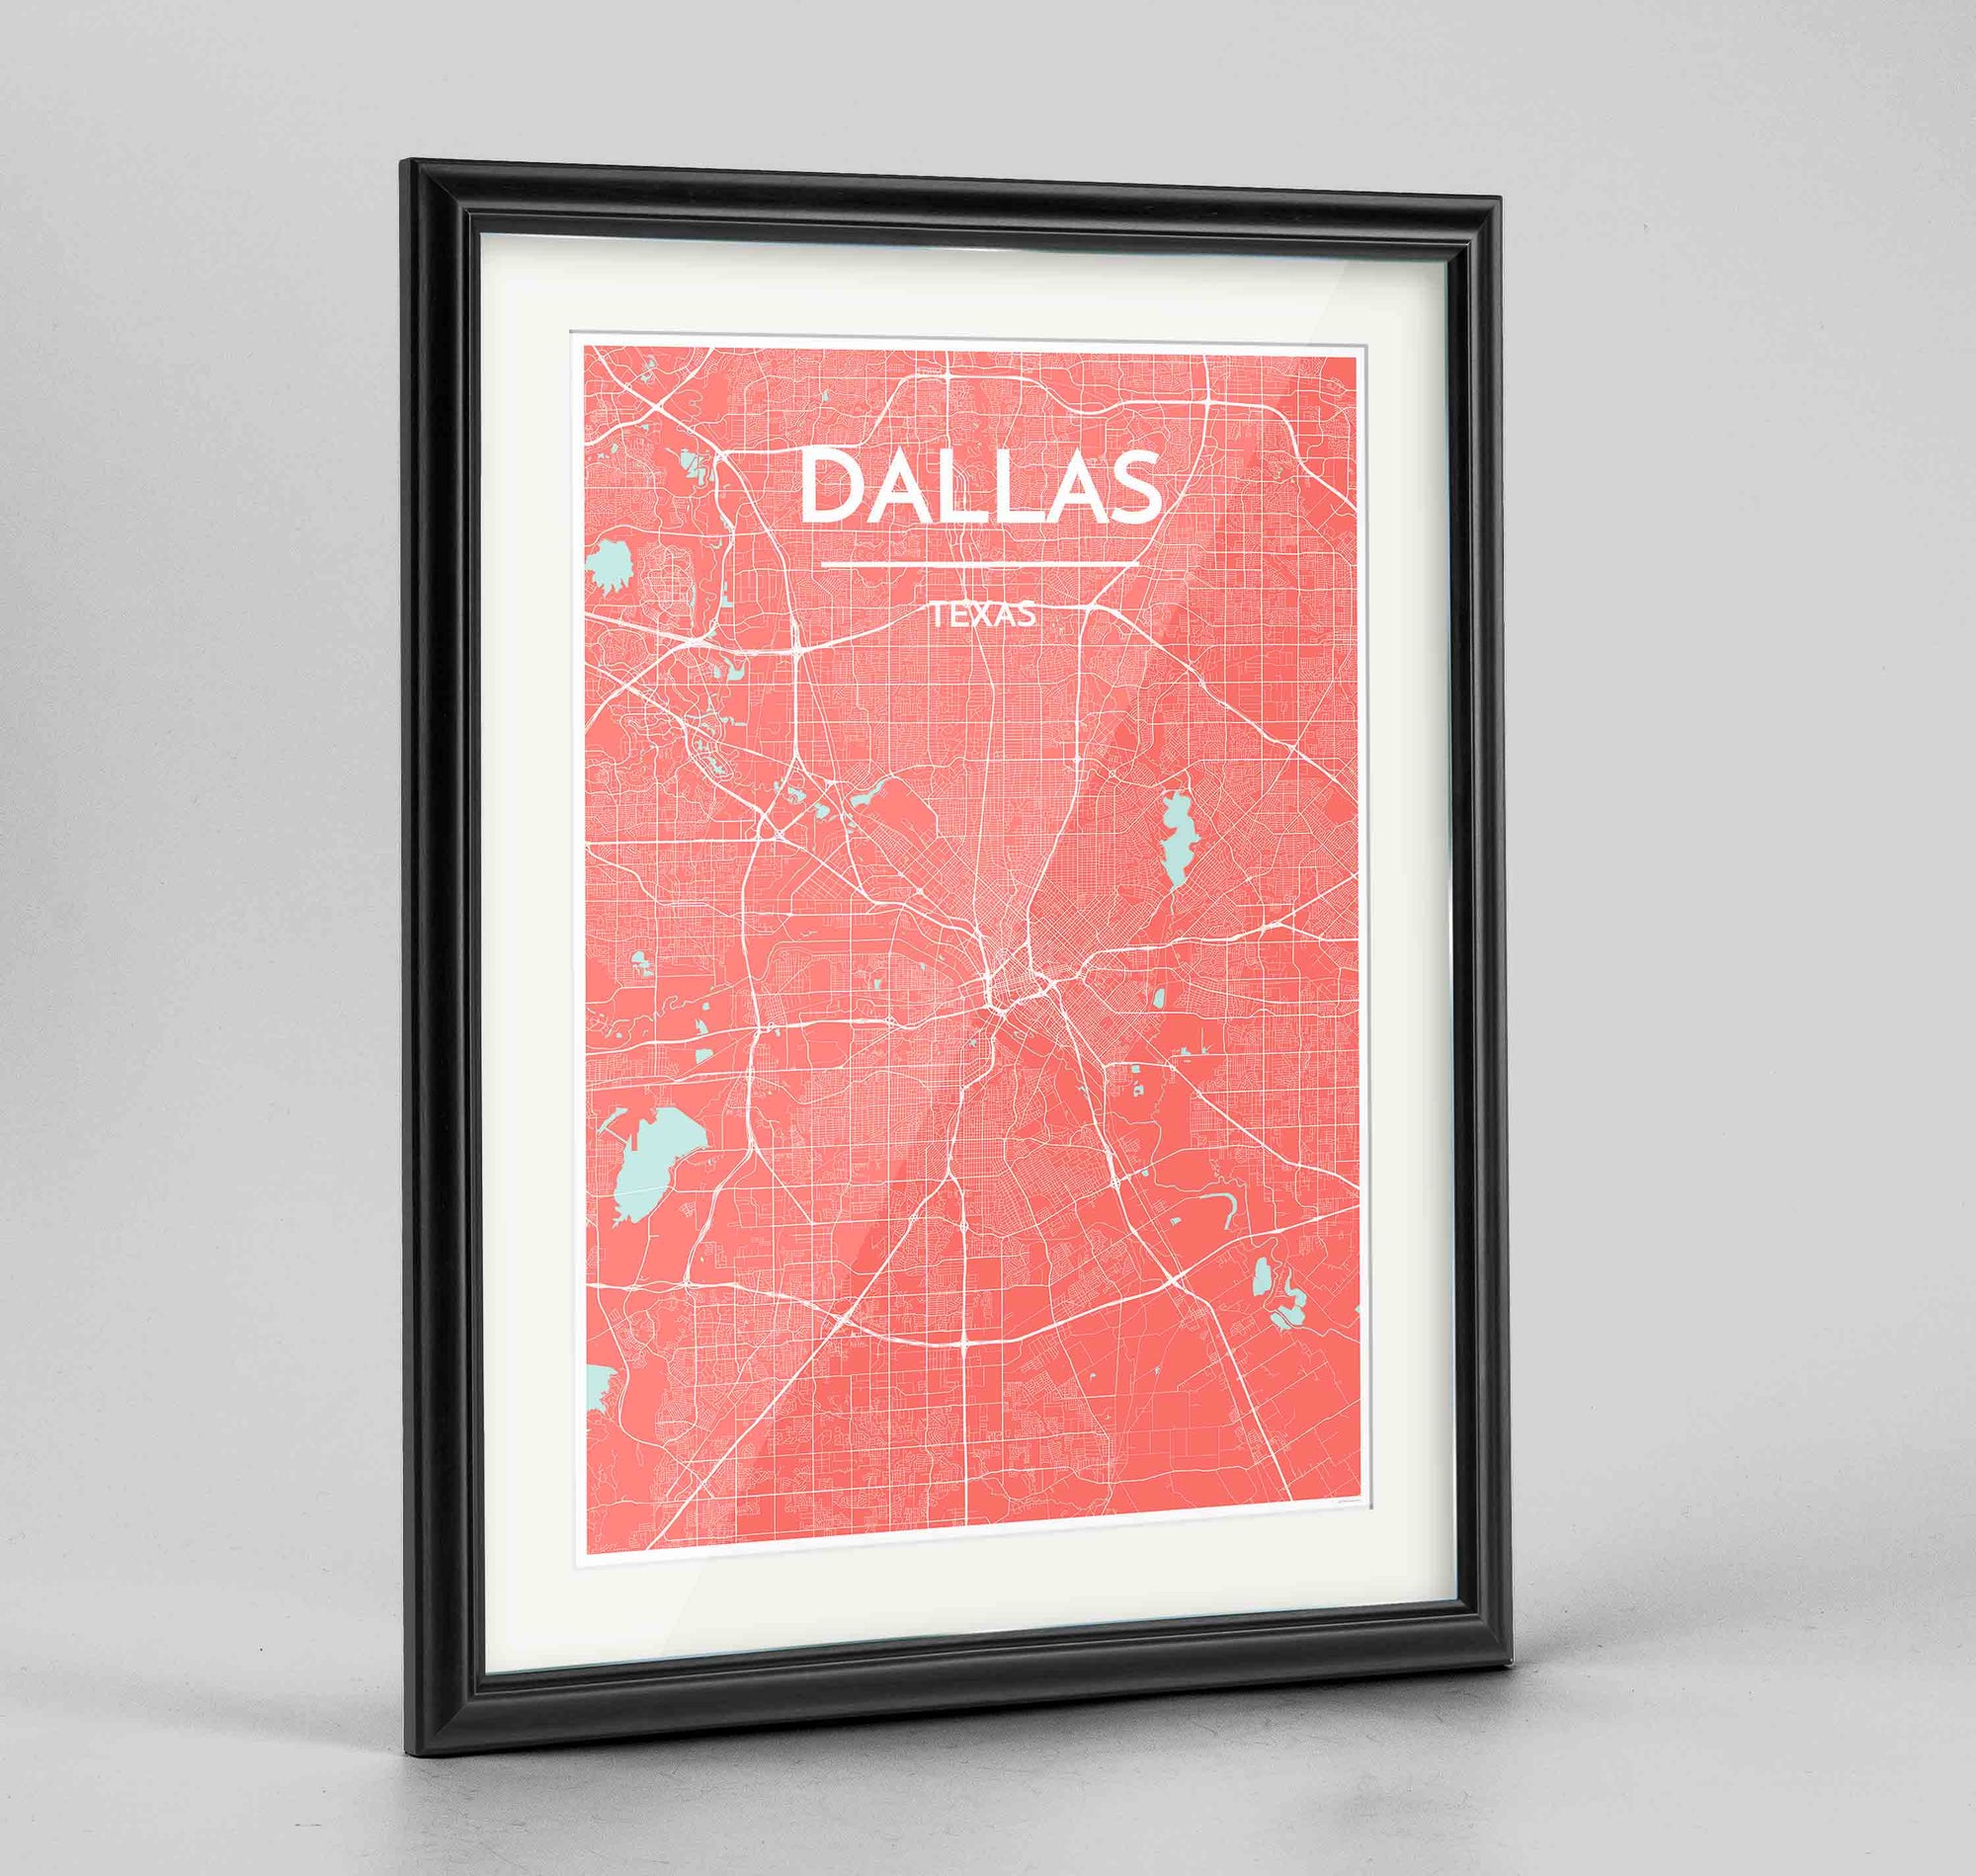 Framed Dallas Map Art Print 24x36" Traditional Black frame Point Two Design Group